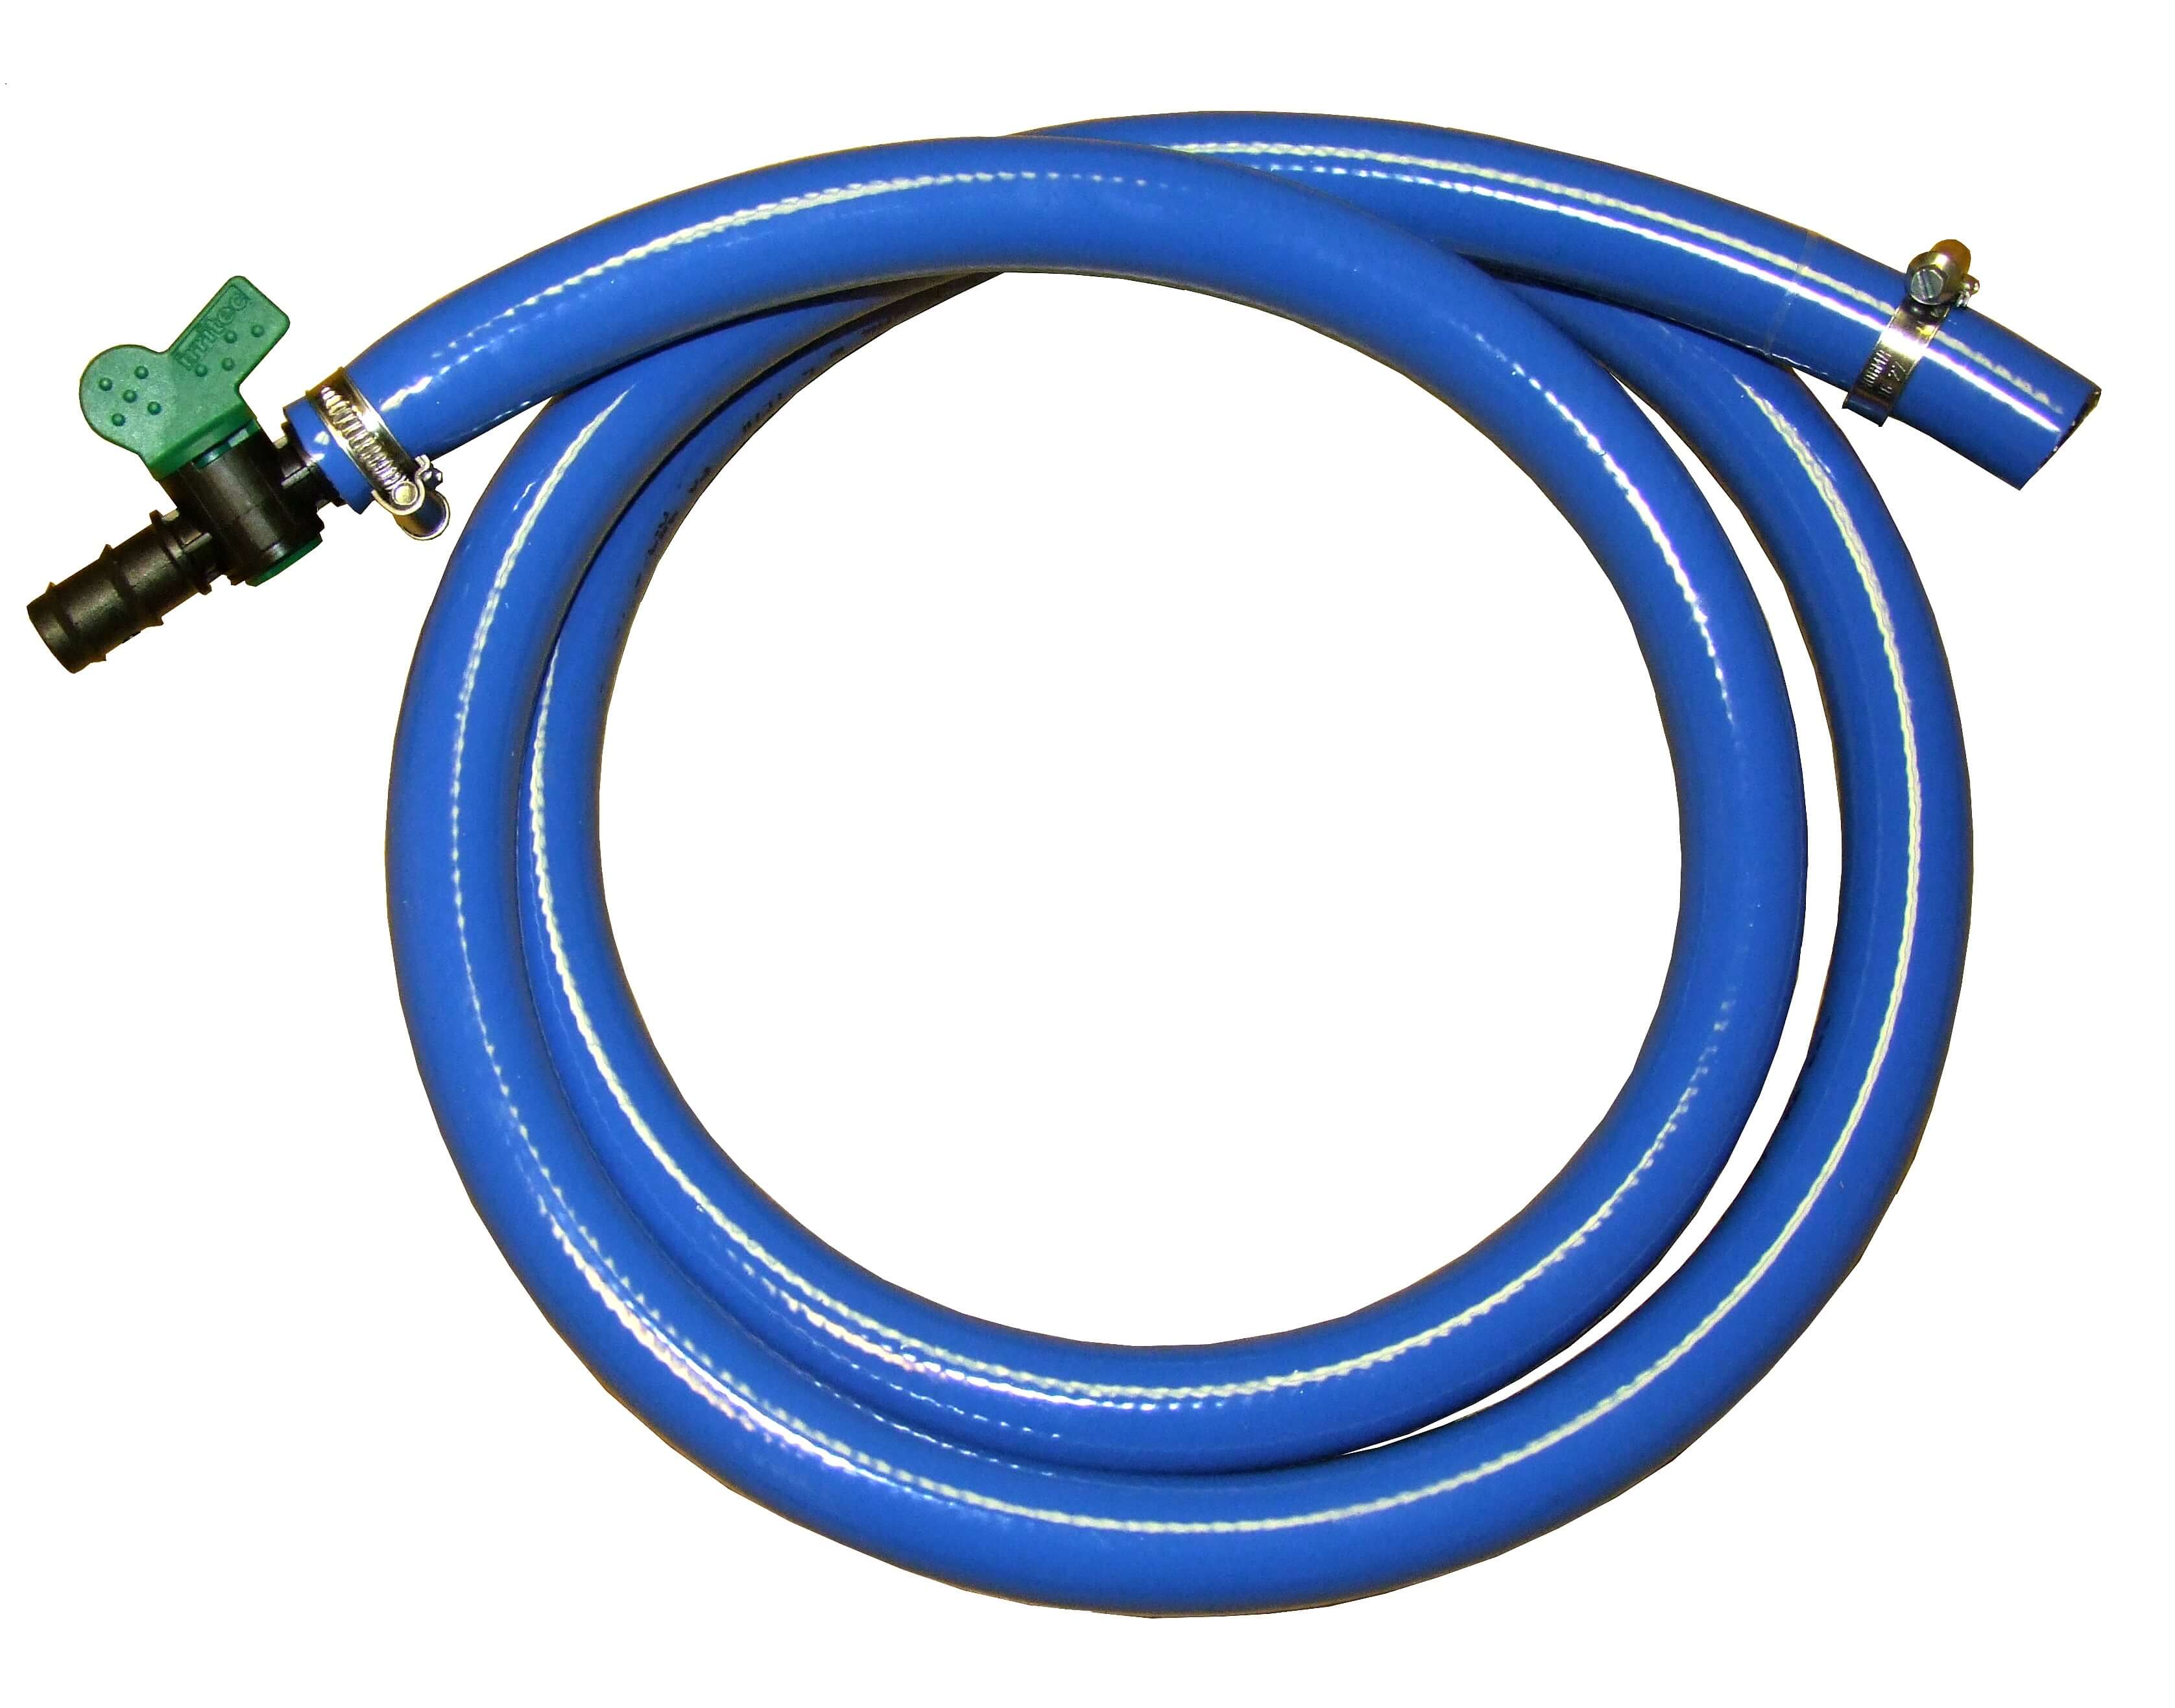 2m AdBlue Hose Kit with Tap